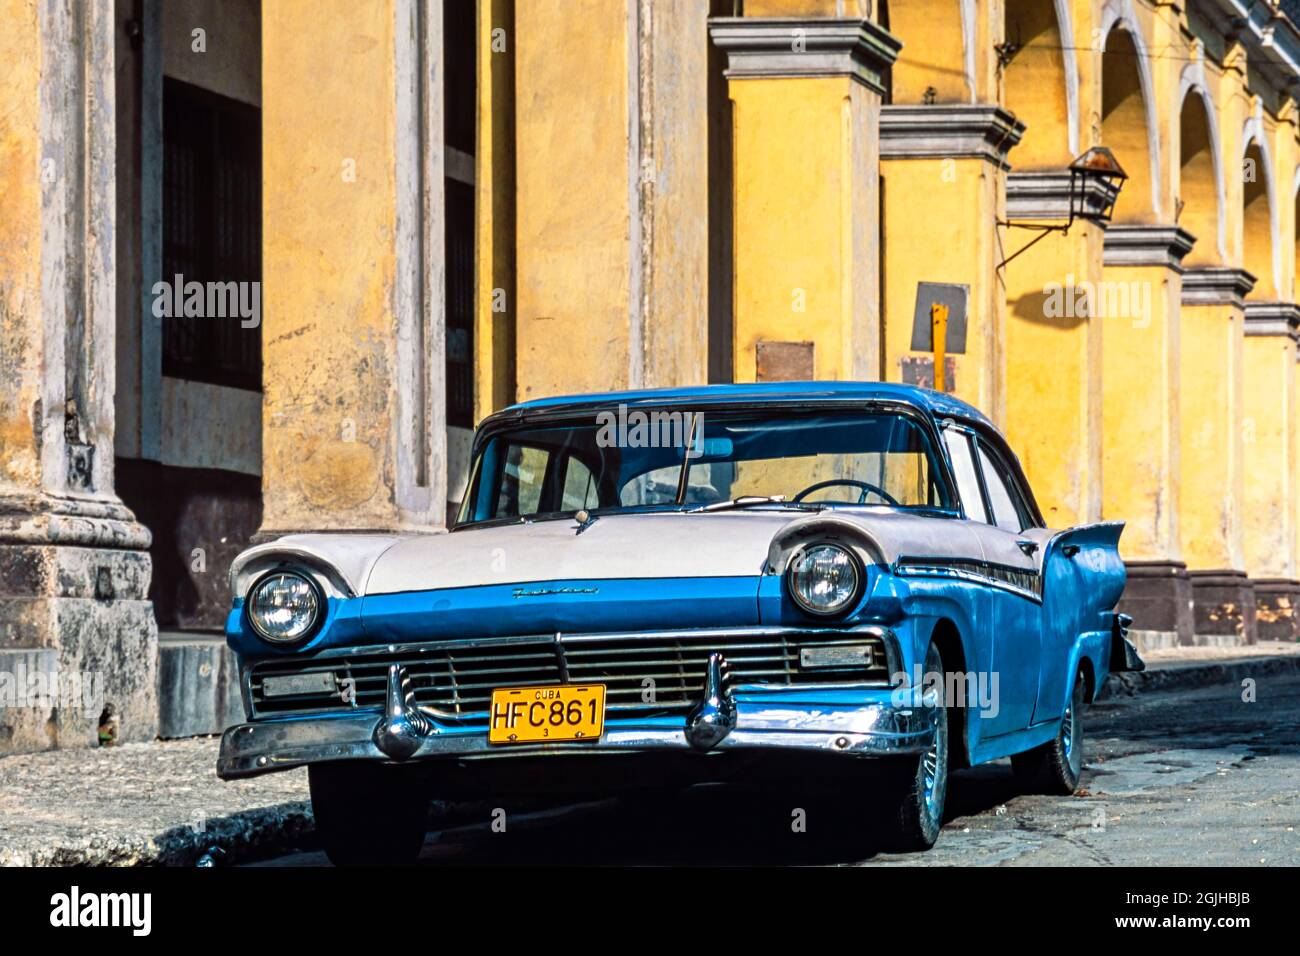 Classic American 1957 Ford Fairlane parked outside colonial building, Havana, Cuba Stock Photo